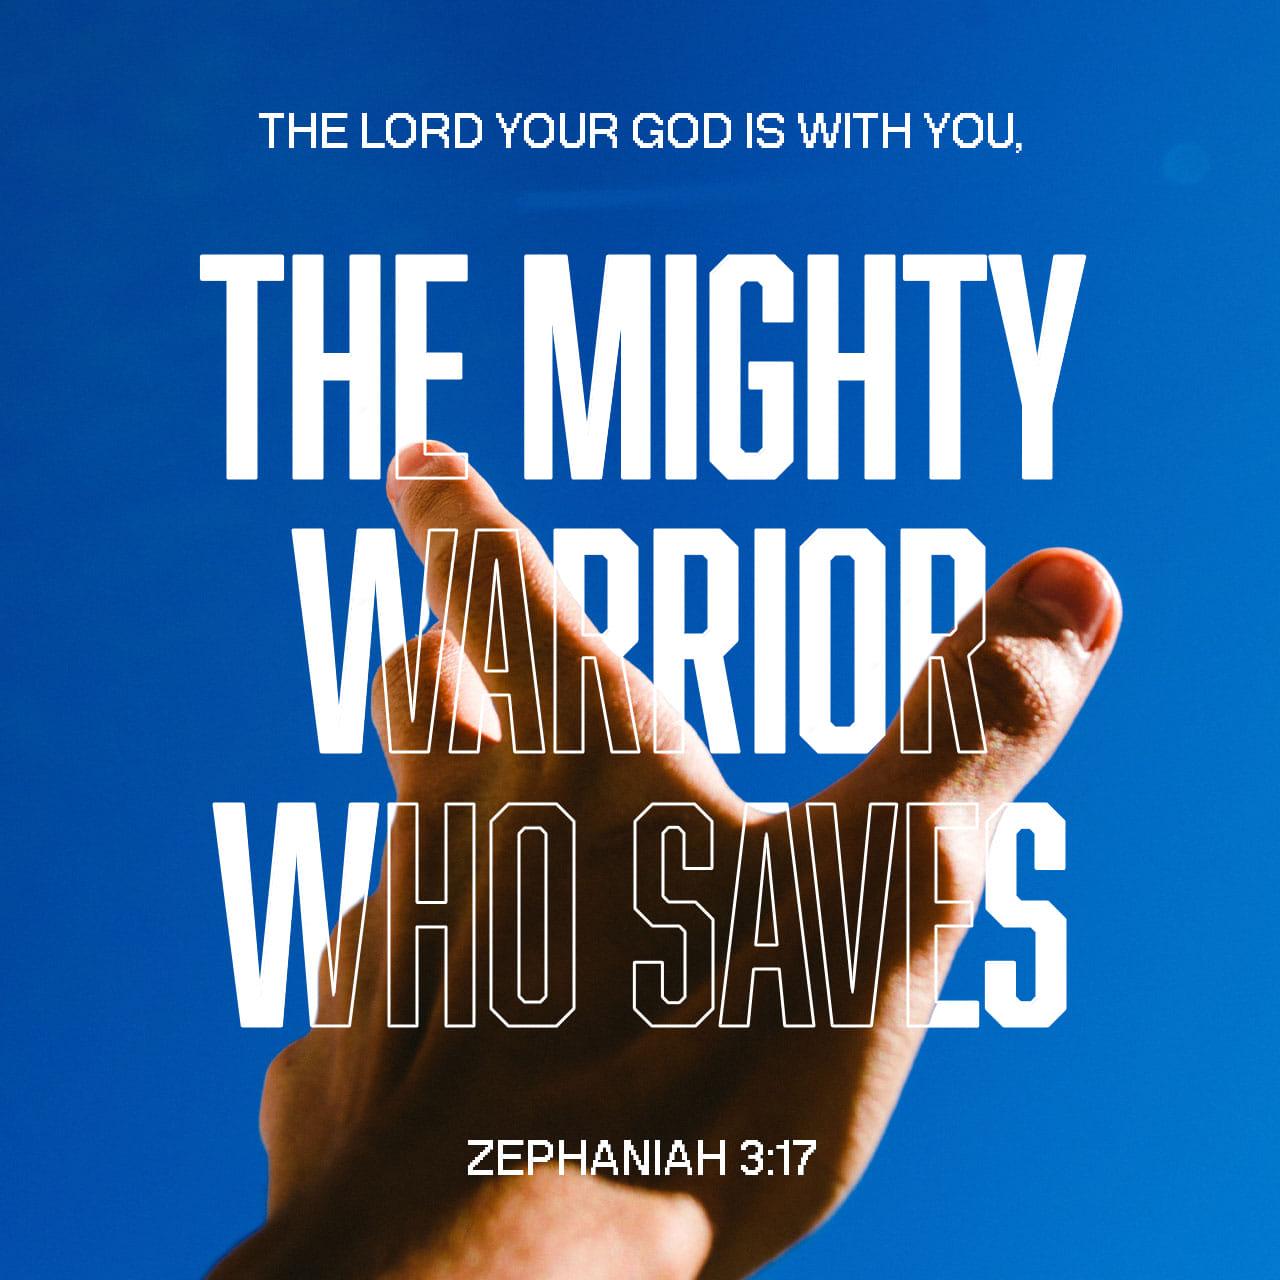 Bible Verse of the Day - day 150 - image 60152 (Zephaniah 3:14-20)